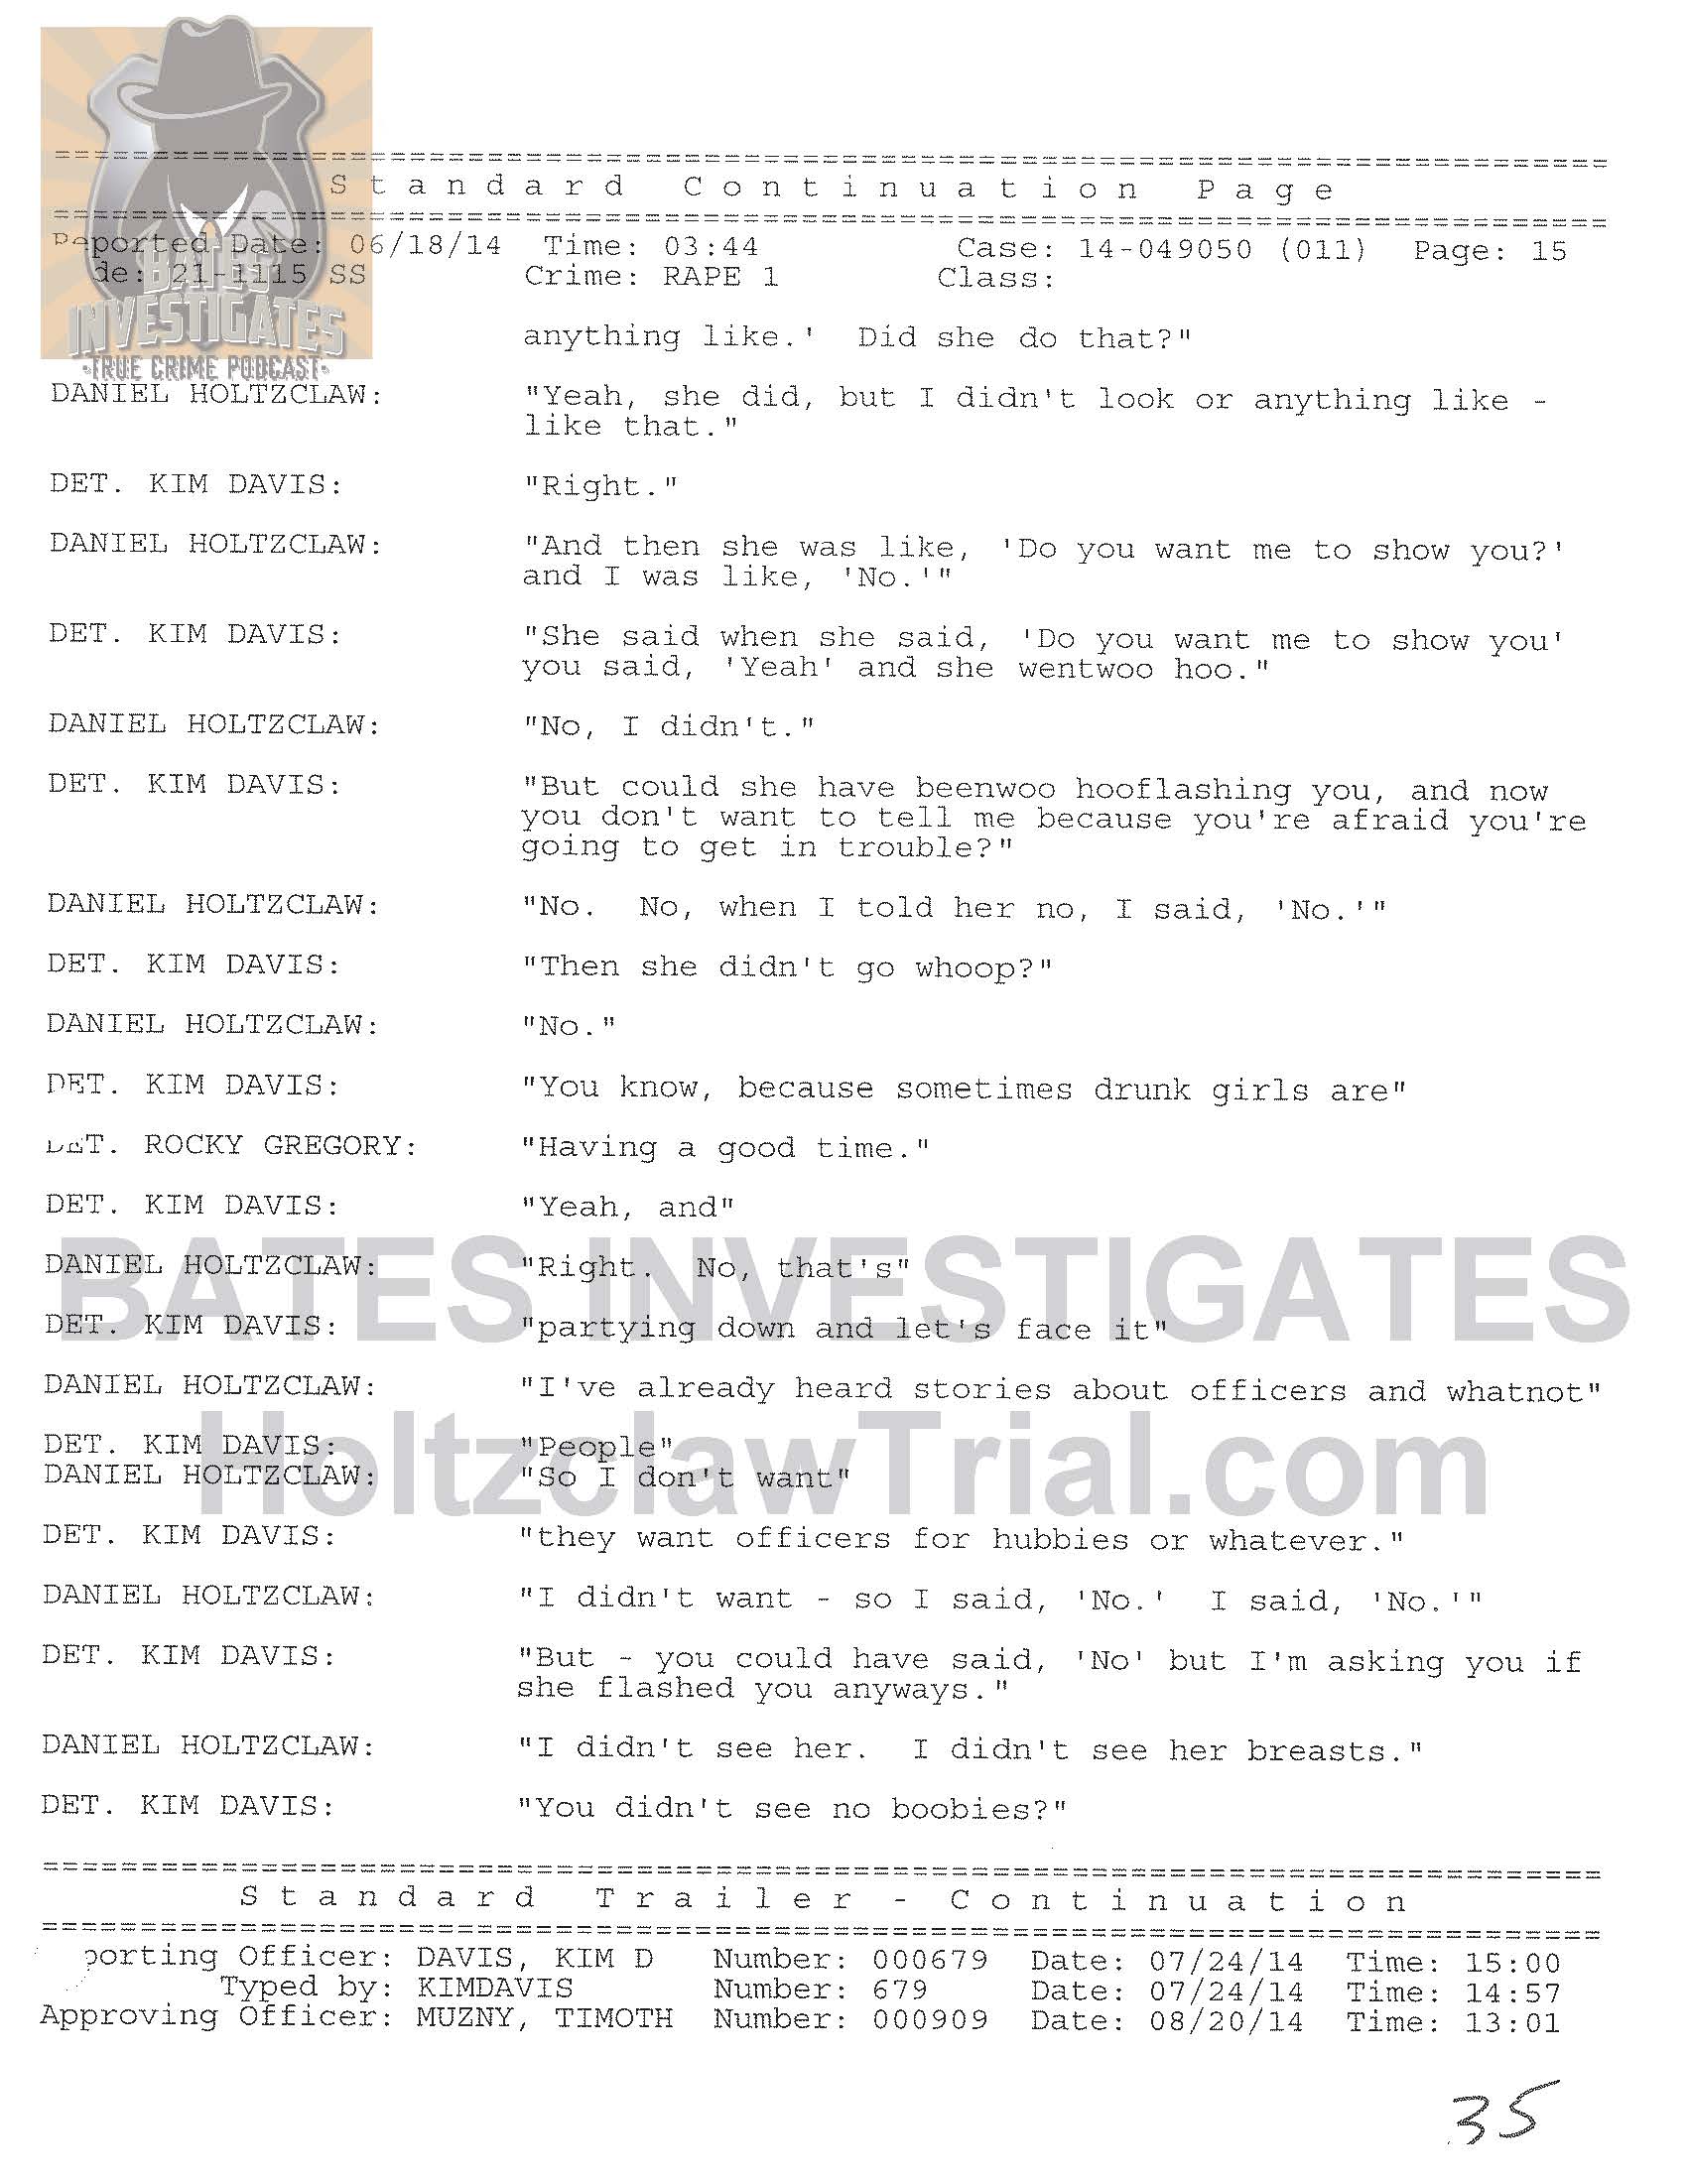 Holtzclaw Interrogation Transcript - Ep02 Redacted_Page_15.jpg